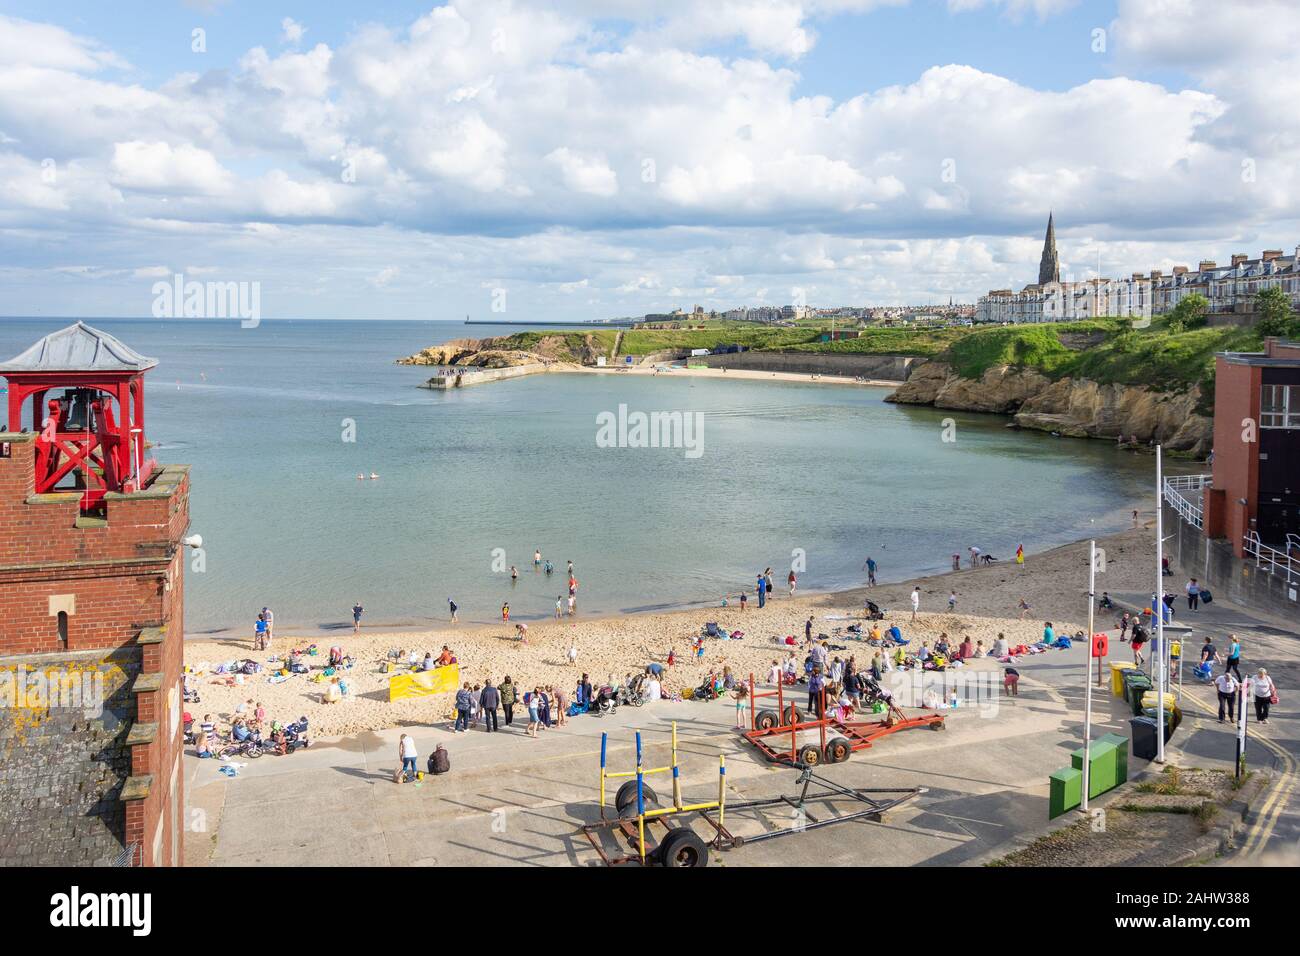 Cullercoats Bay, Cullercoats, Tyne and Wear, England, United Kingdom Stock Photo